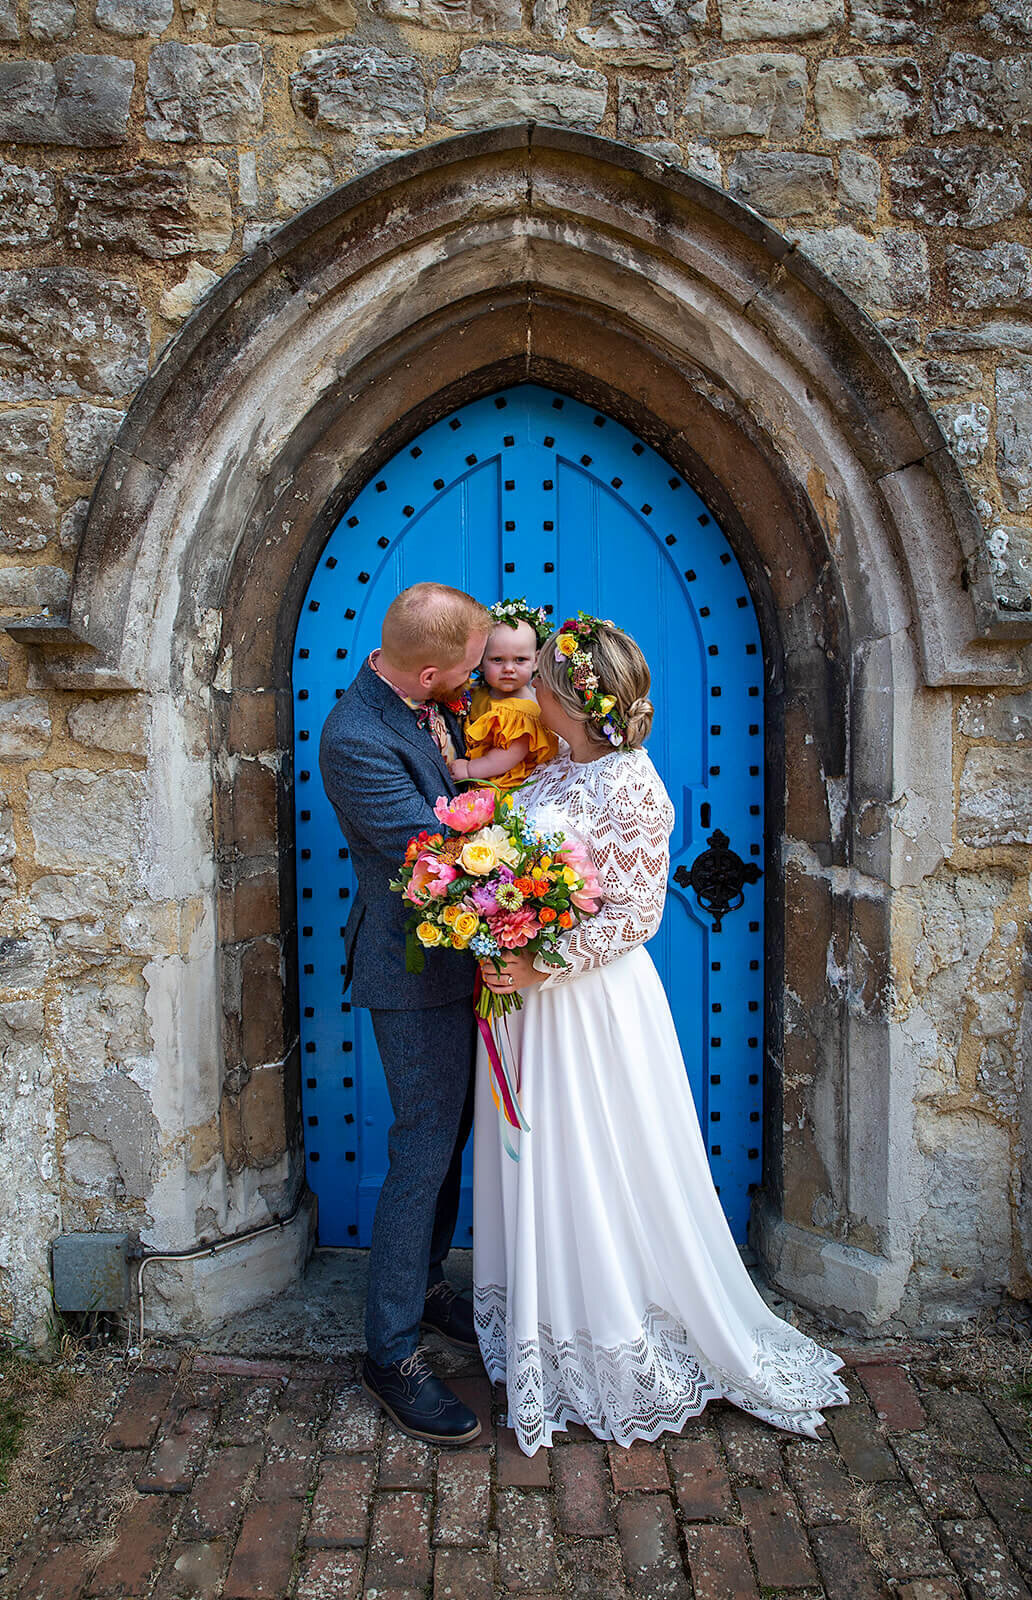 Bride, Groom and baby .  Post for photo by blue door of Bearsted Chuch